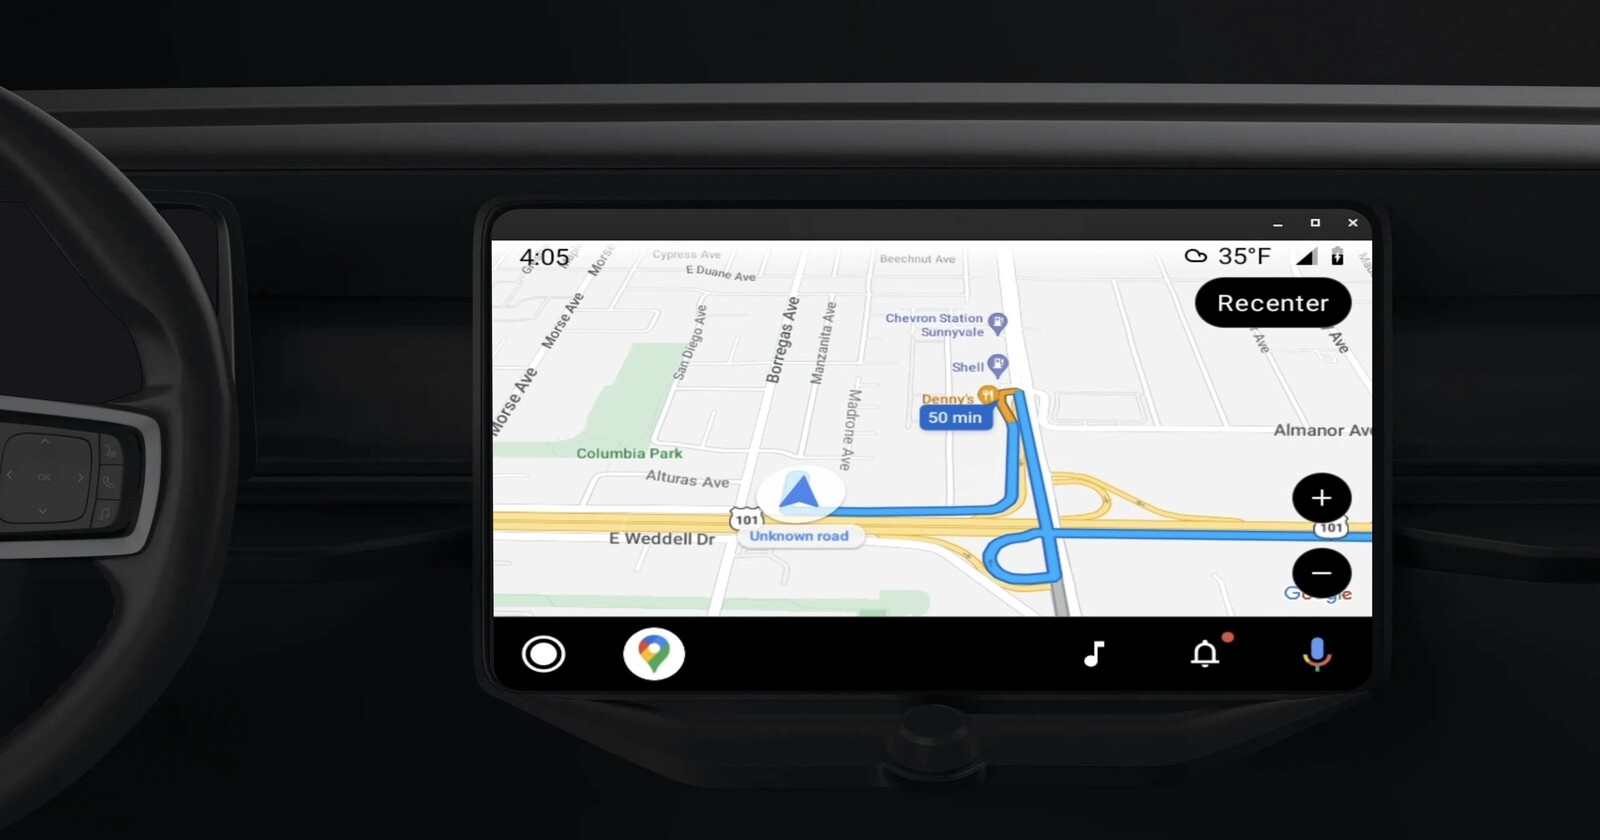 Android Auto now supports Google Maps 'save parking location' feature